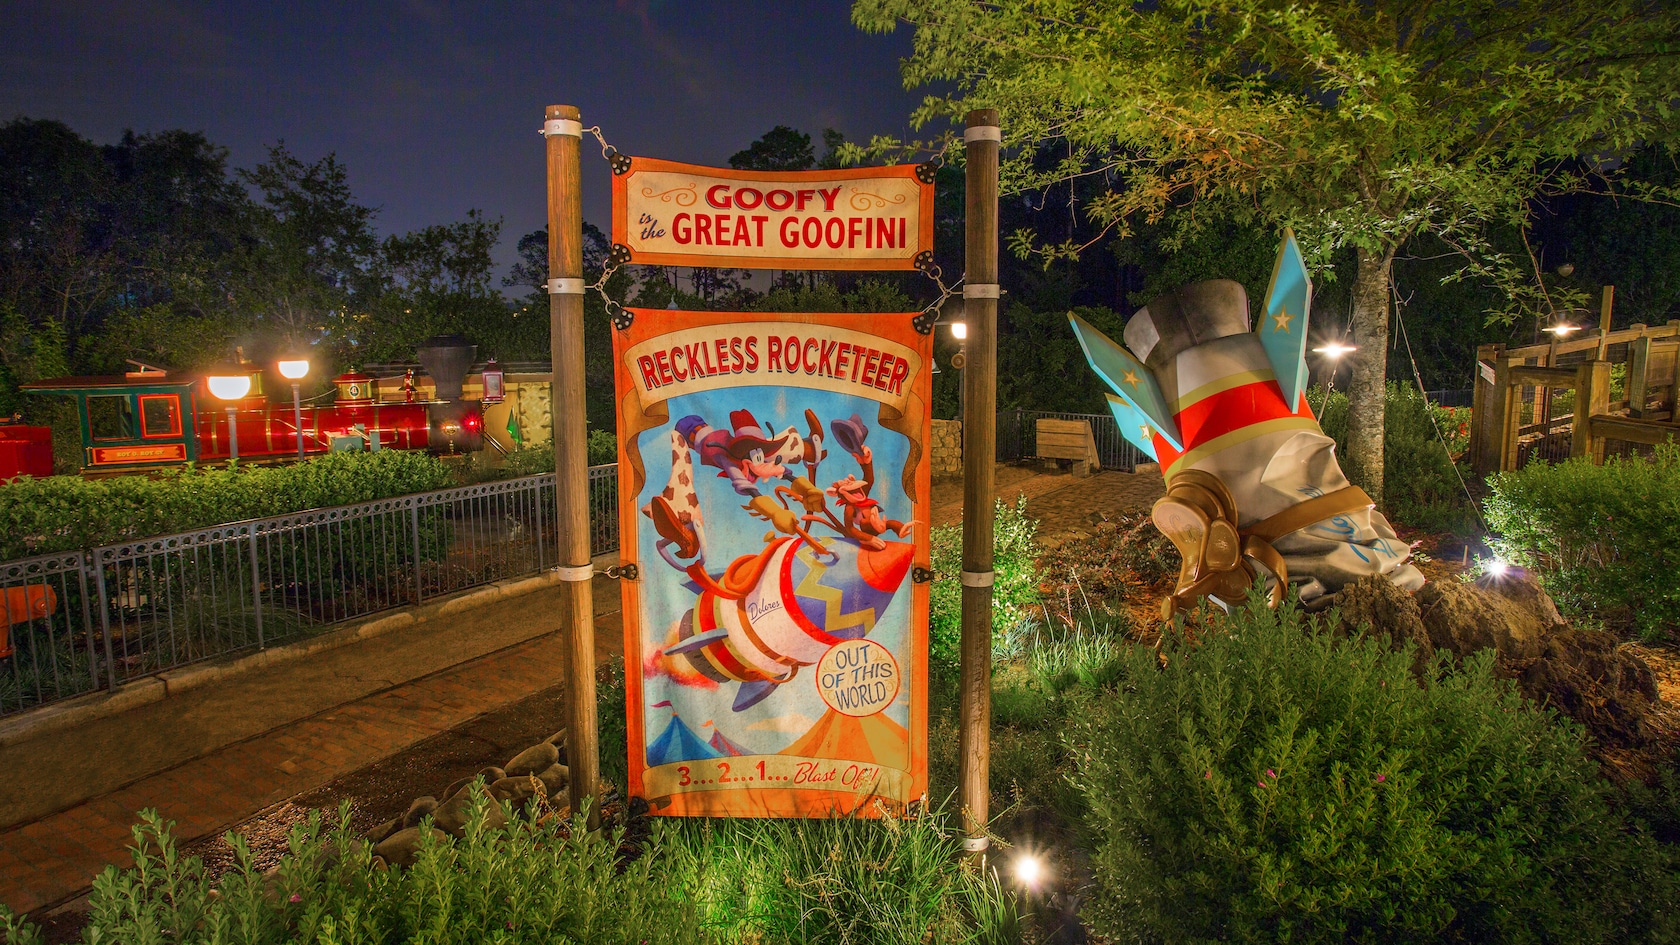 A crashed rocket ship sits next to a sign featuring Goofy as the Reckless Rocketeer